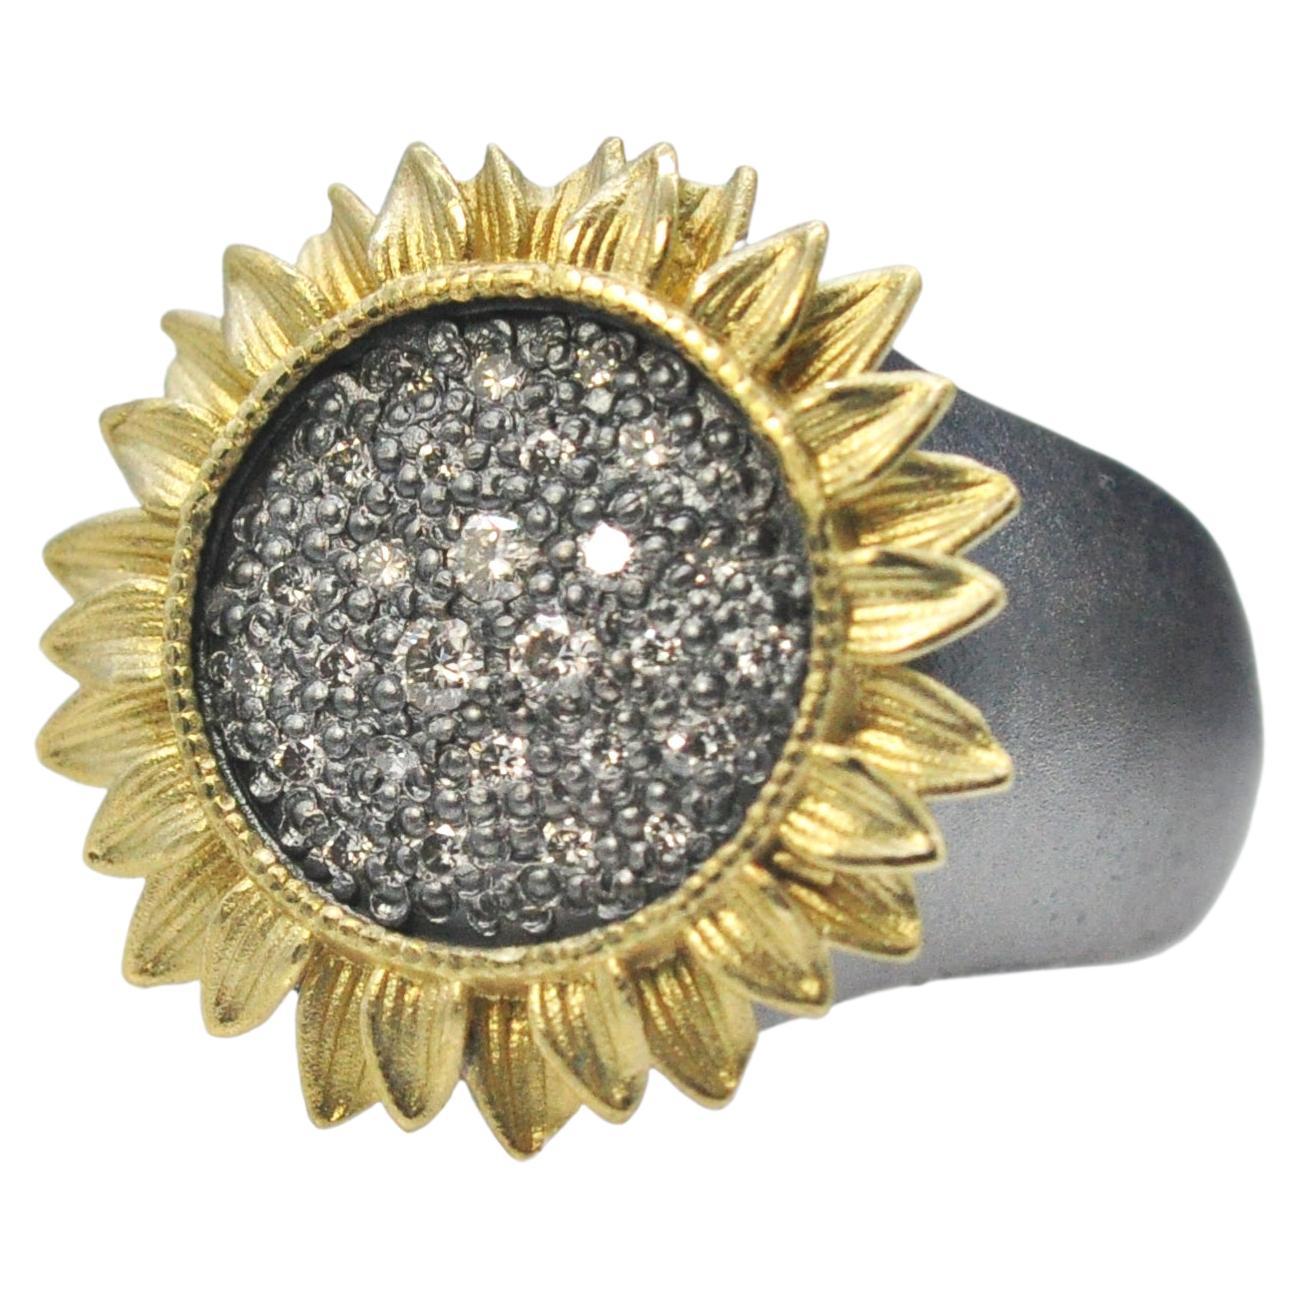 Sunflower Ring with Pave Set Diamonds in Oxidized Silver, Large